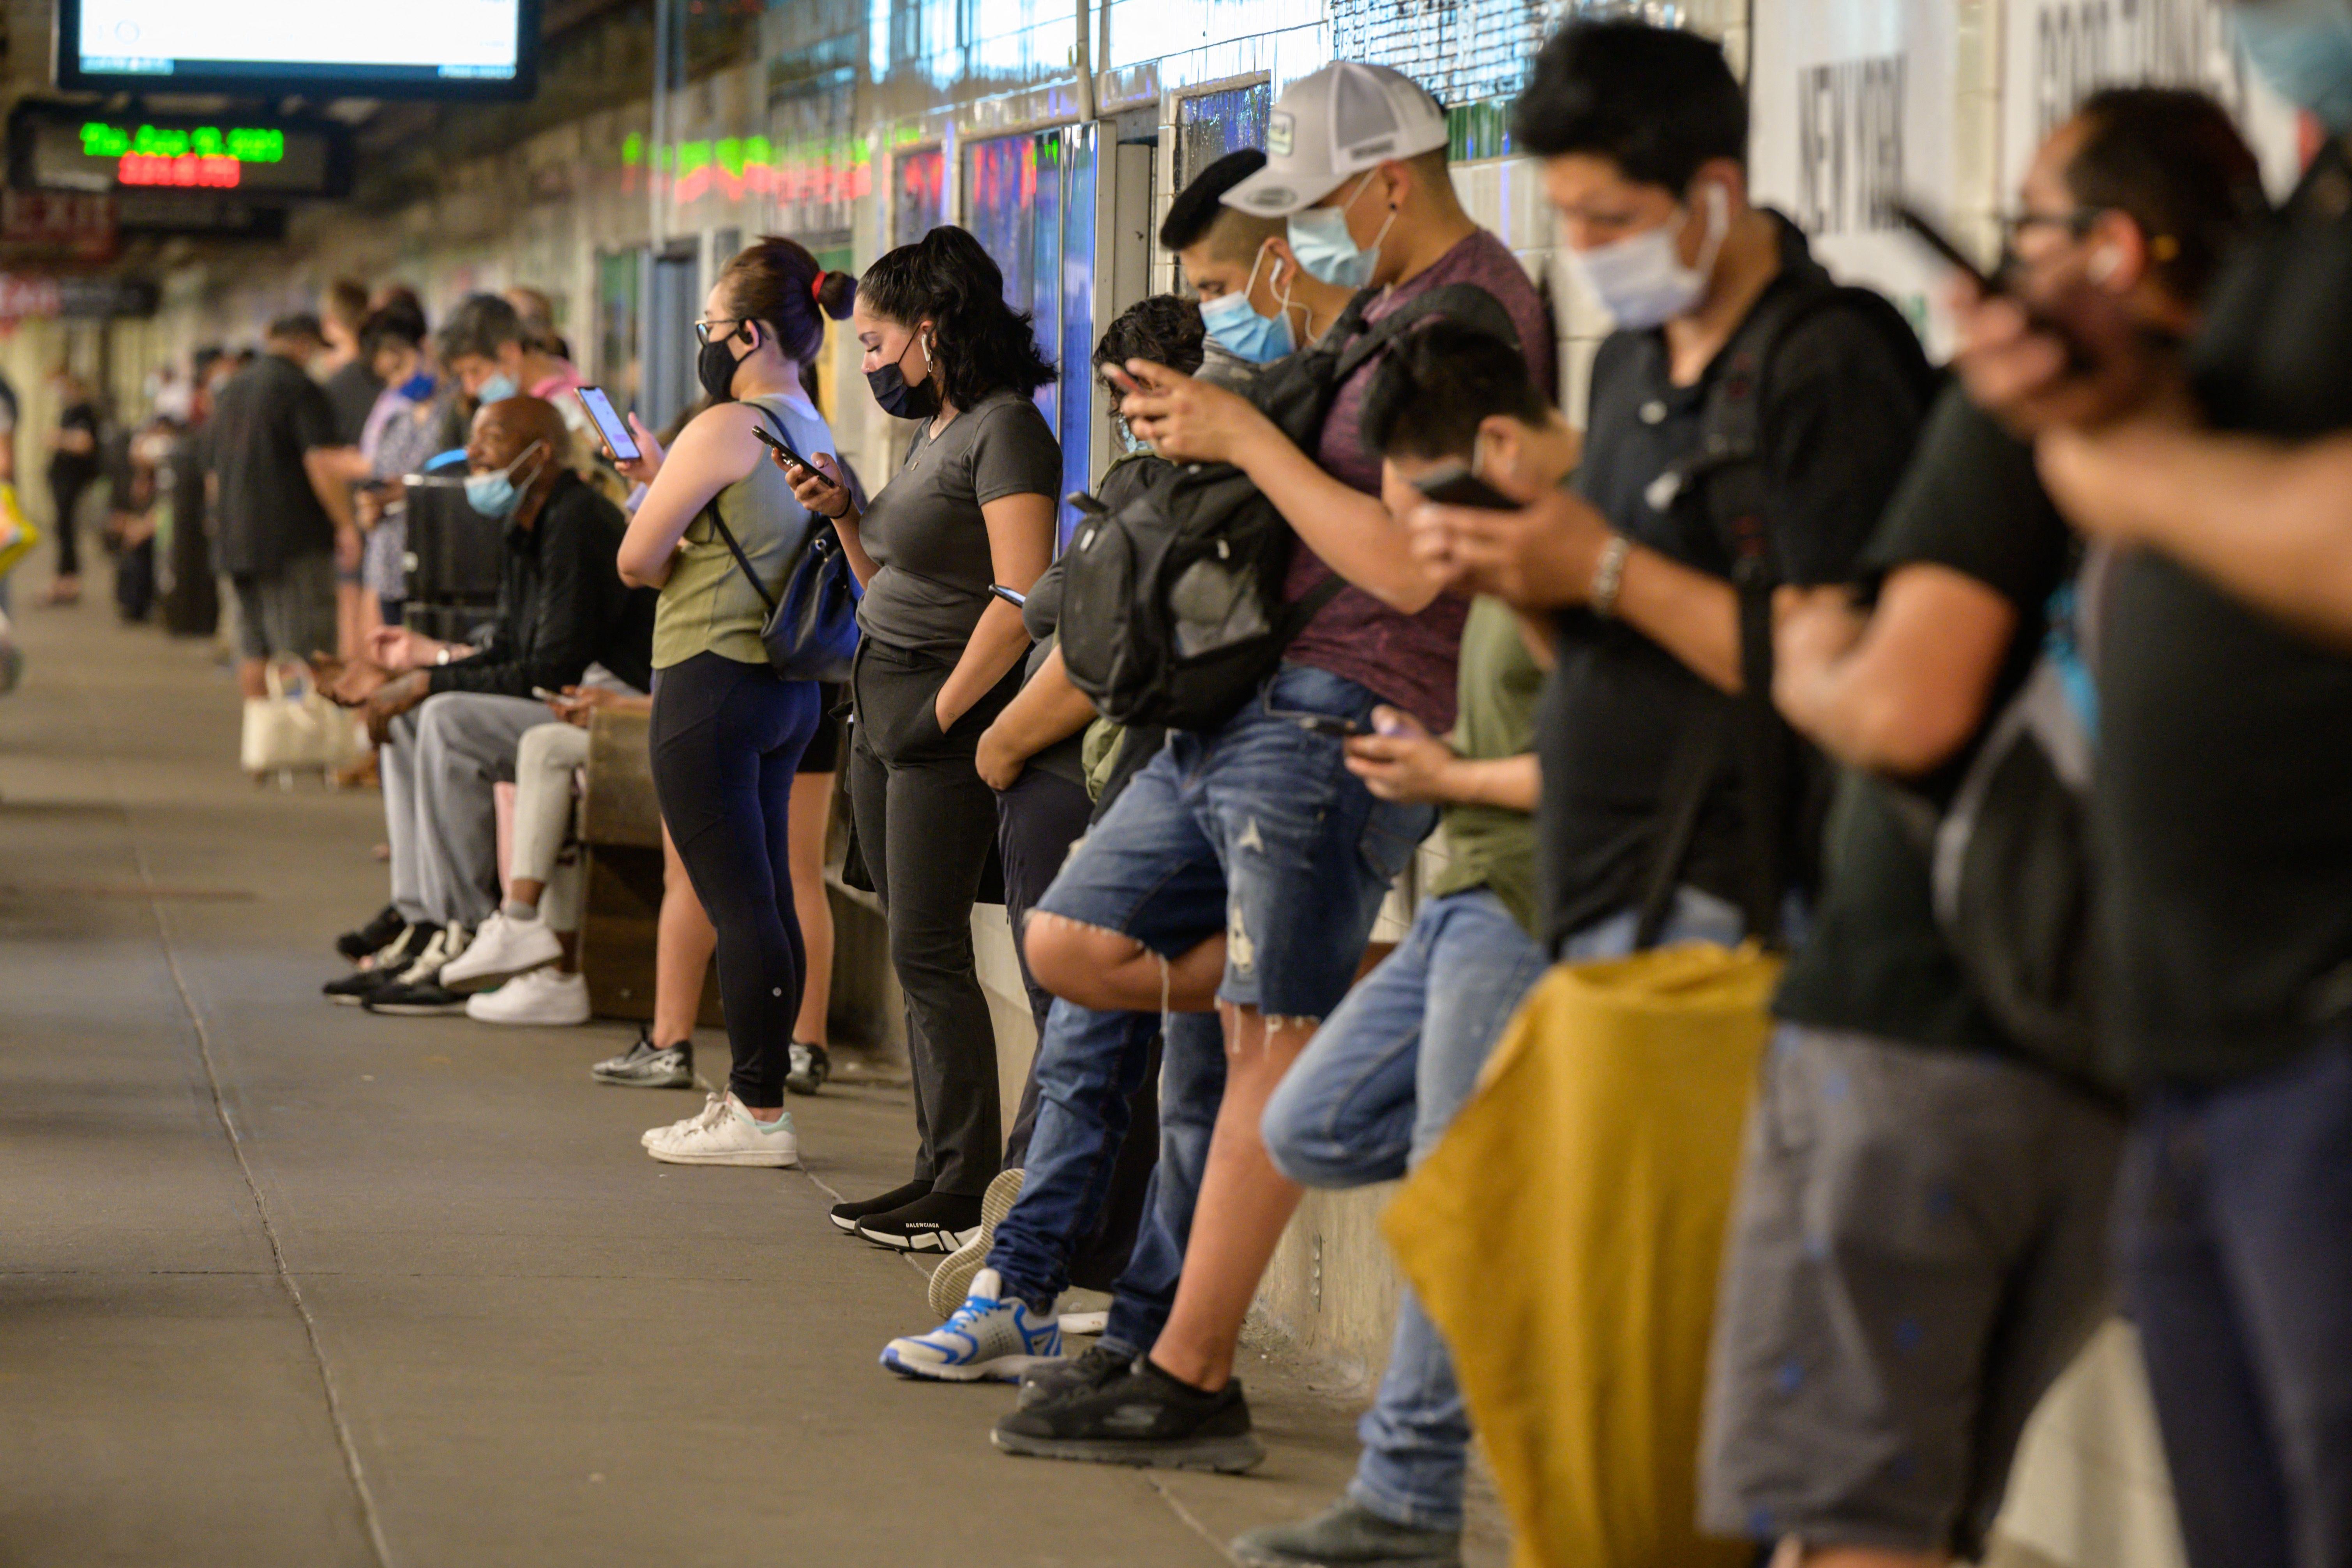 Commuters look at their mobile phones as they wait for a subway train in New York.